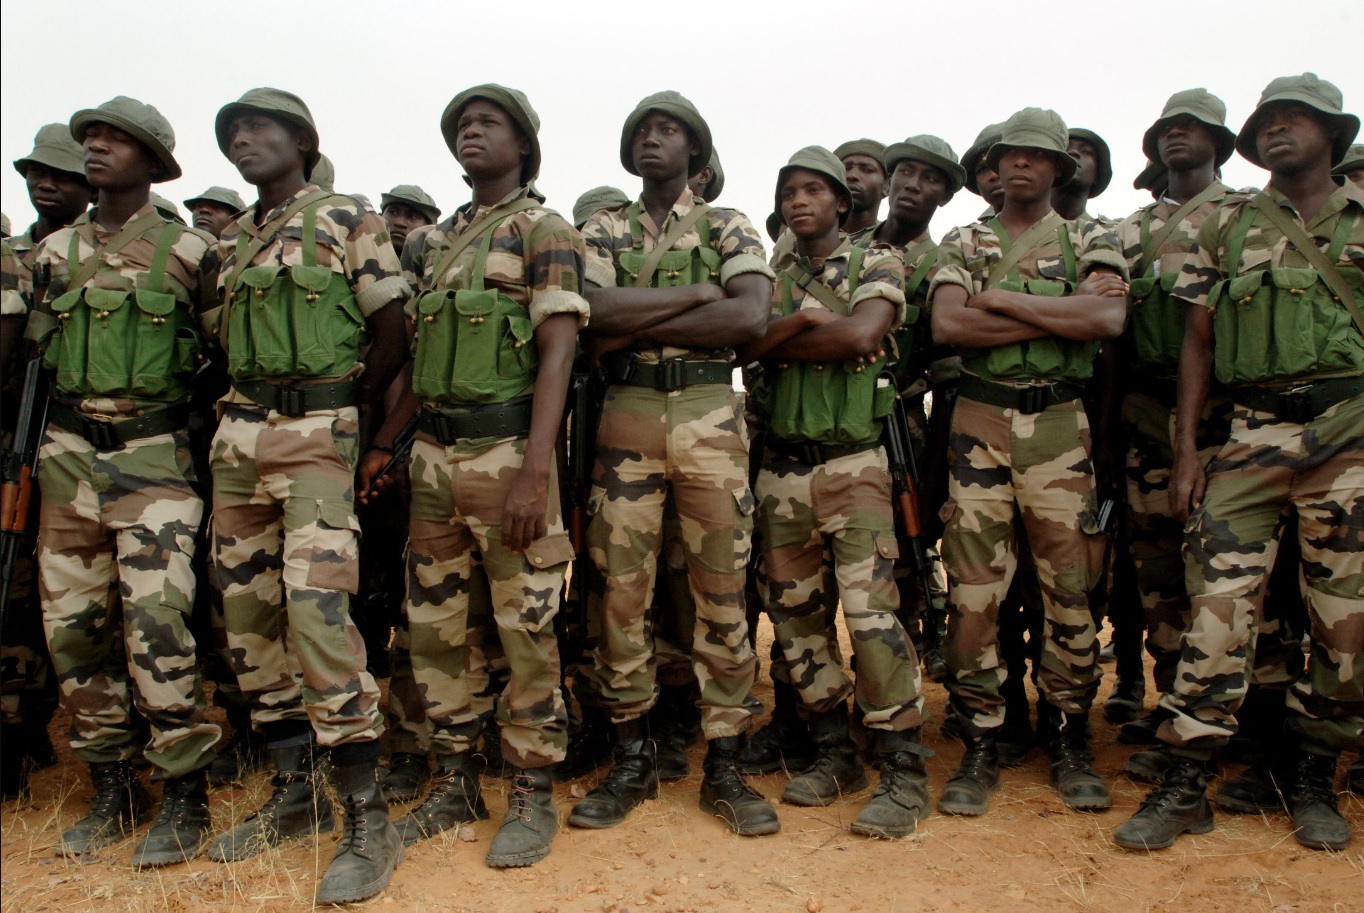 Reporting on army's performance in Nigeria lands journalists in trouble 